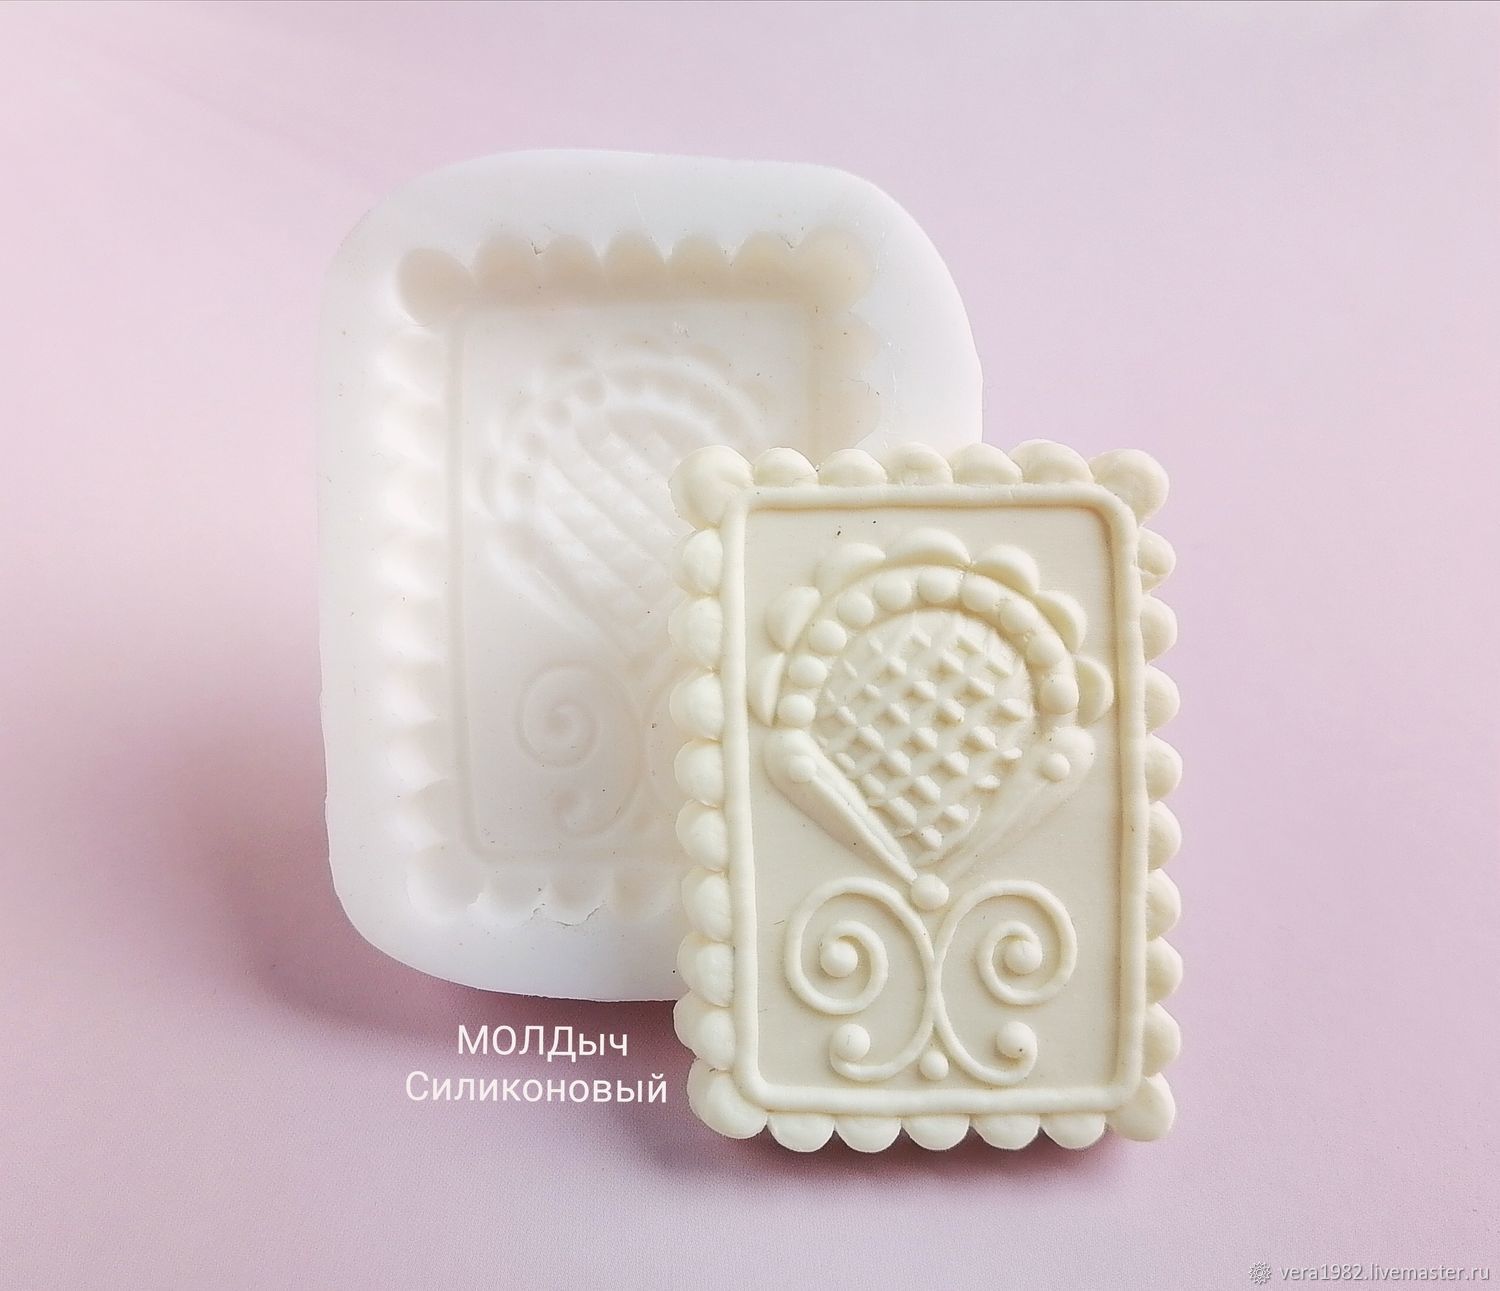 Chocolate mold 5,9 x 4,2 x 0,5 cm Silicone Mold, Molds for making flowers, Odintsovo,  Фото №1